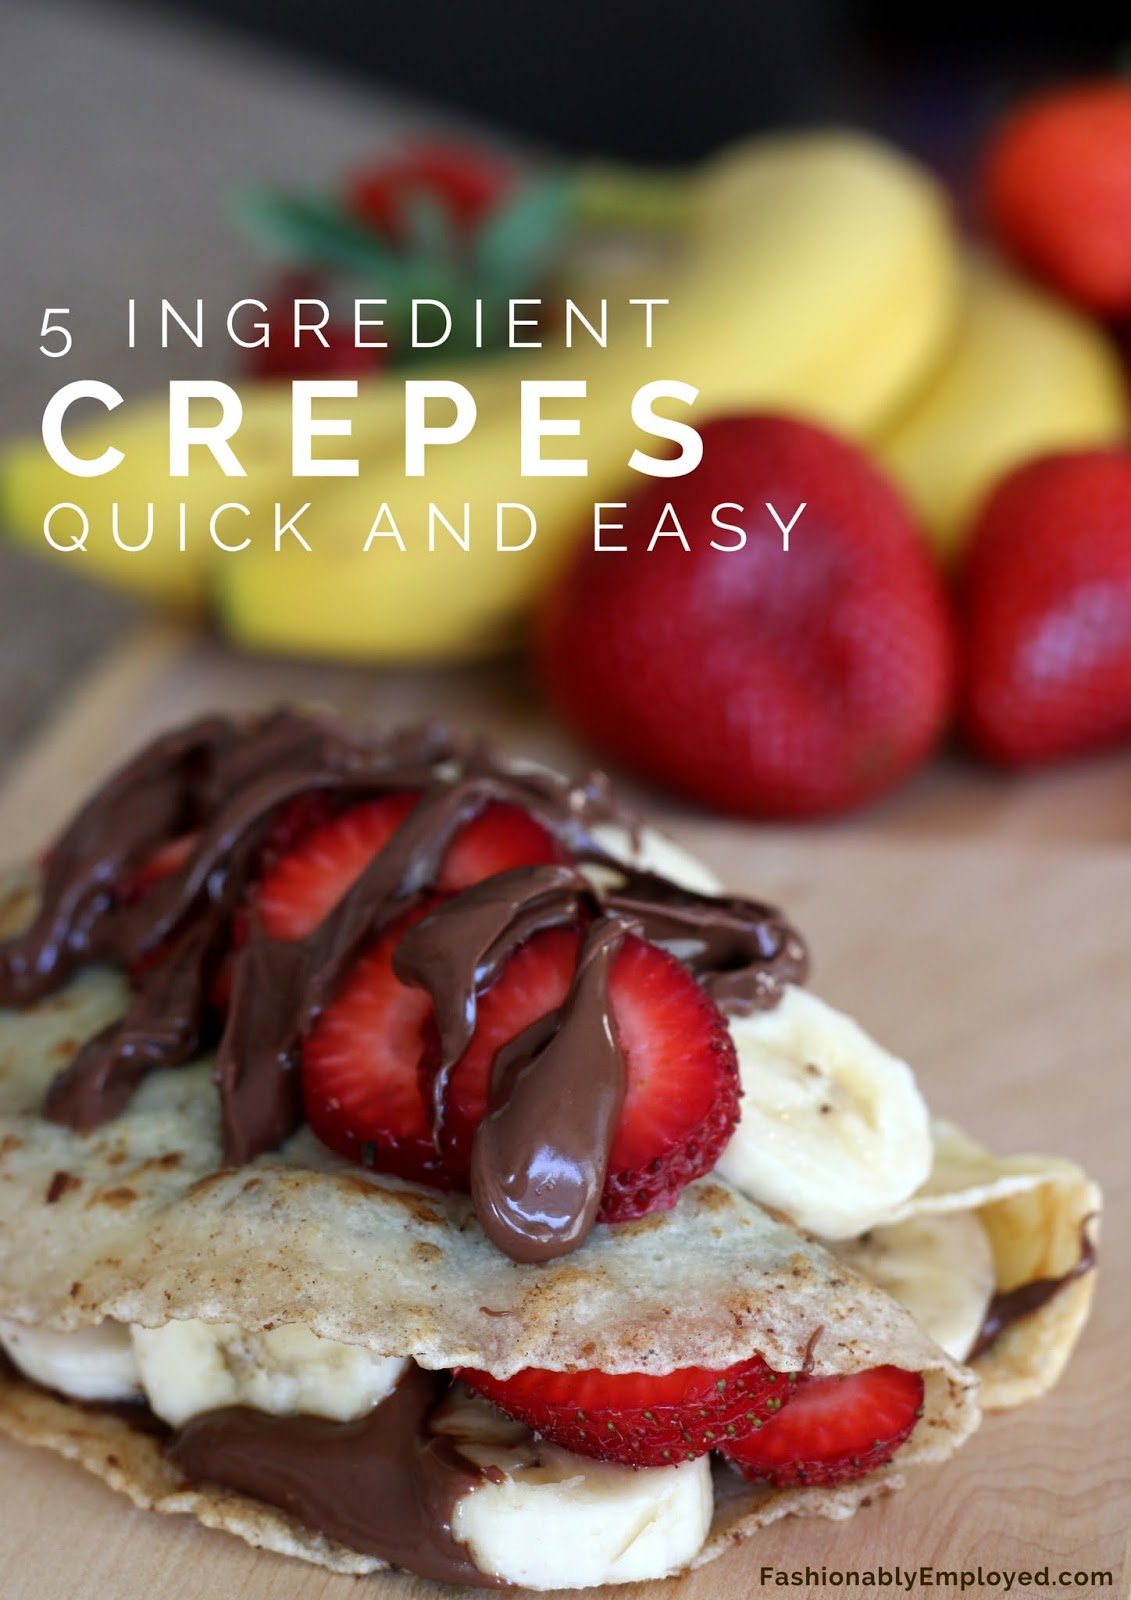 FashionablyEmployed.com | Kid-Friendly "Parisian" Inspired Lunch | 5 Ingredient Quick and Easy Crepes, family dessert, easy meal prep, cook with kids